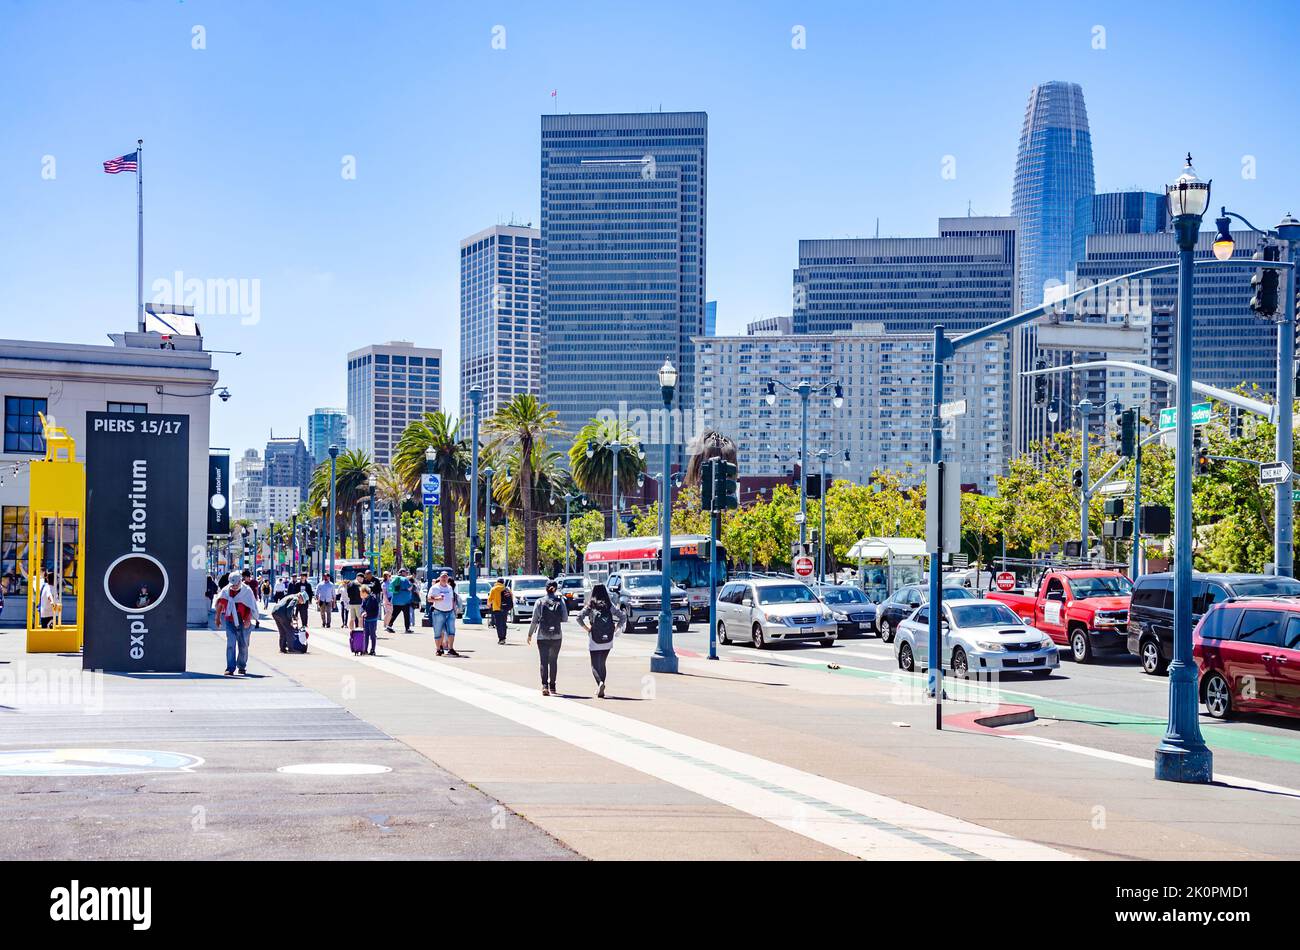 A view along Embarcadero in San Francisco  with skyscrapers in the distance an The Exploratorium science museum in the foreground Stock Photo